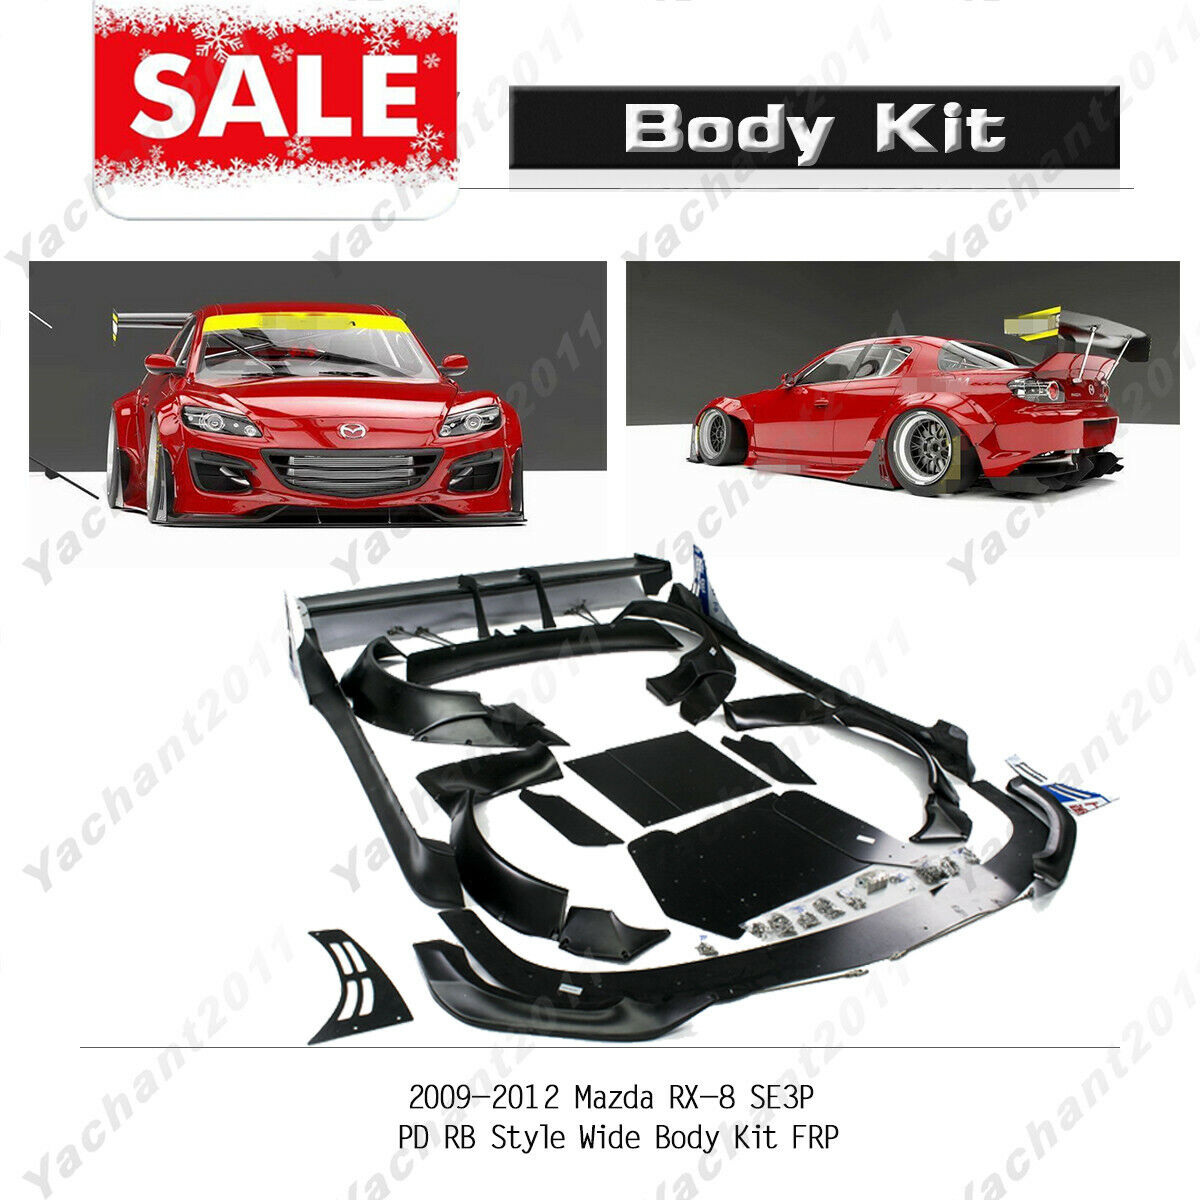 FRP PD RB BodyKit For 09-12 Mazda RX-8 SE3P Lip Fender Wing Canards Diffuser